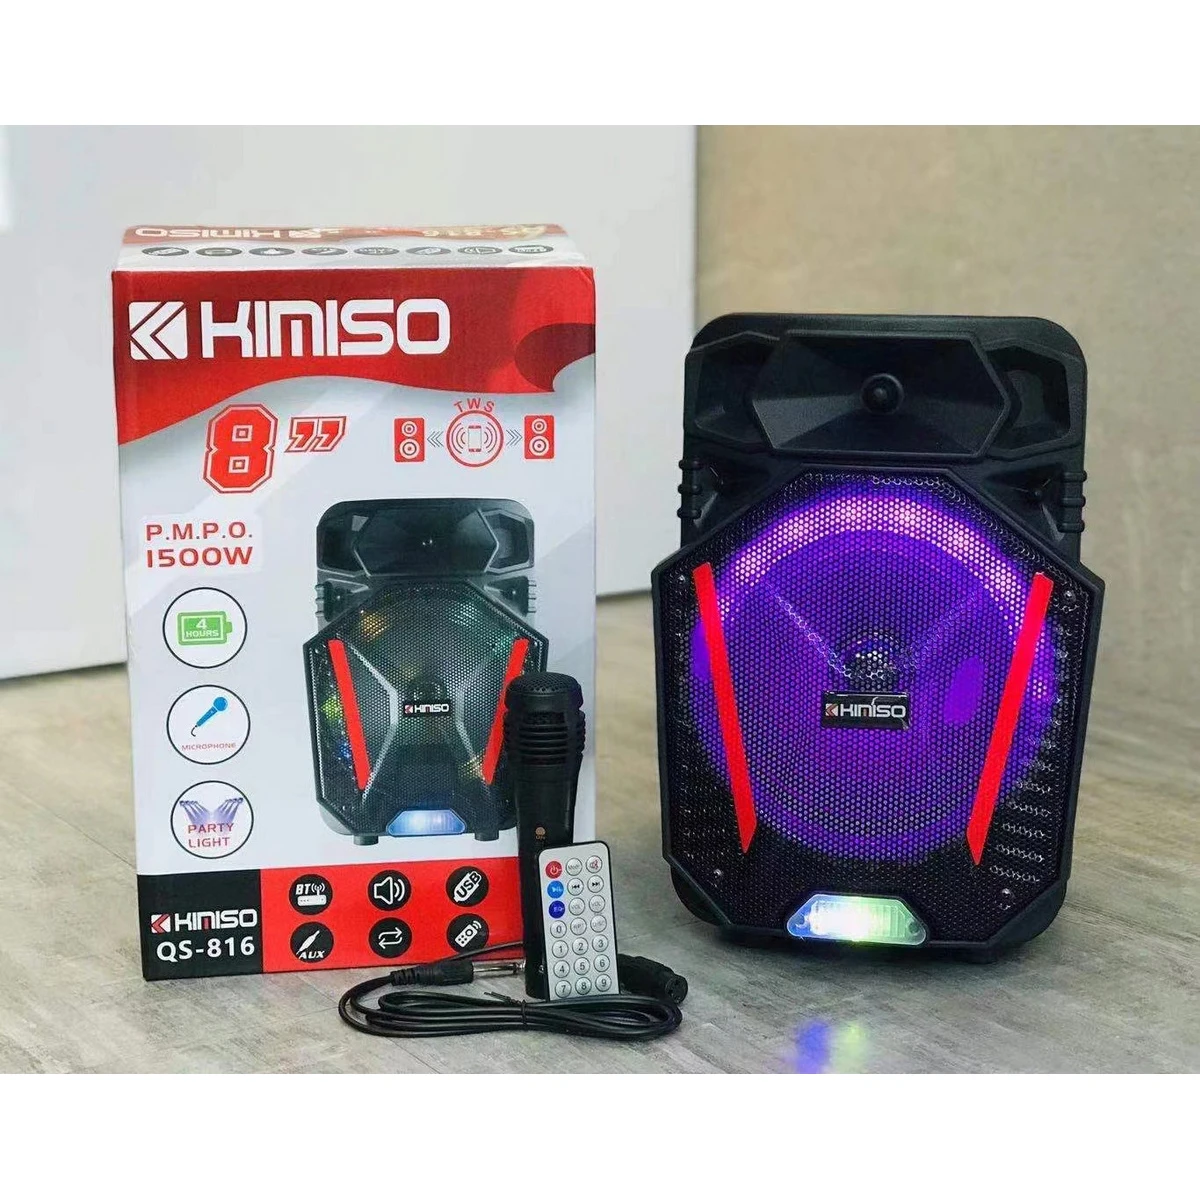 

QS-816 Lowest Price Speakers KIMISO Double 6.5 Inch Horn Bass Speaker With Coloured Lights